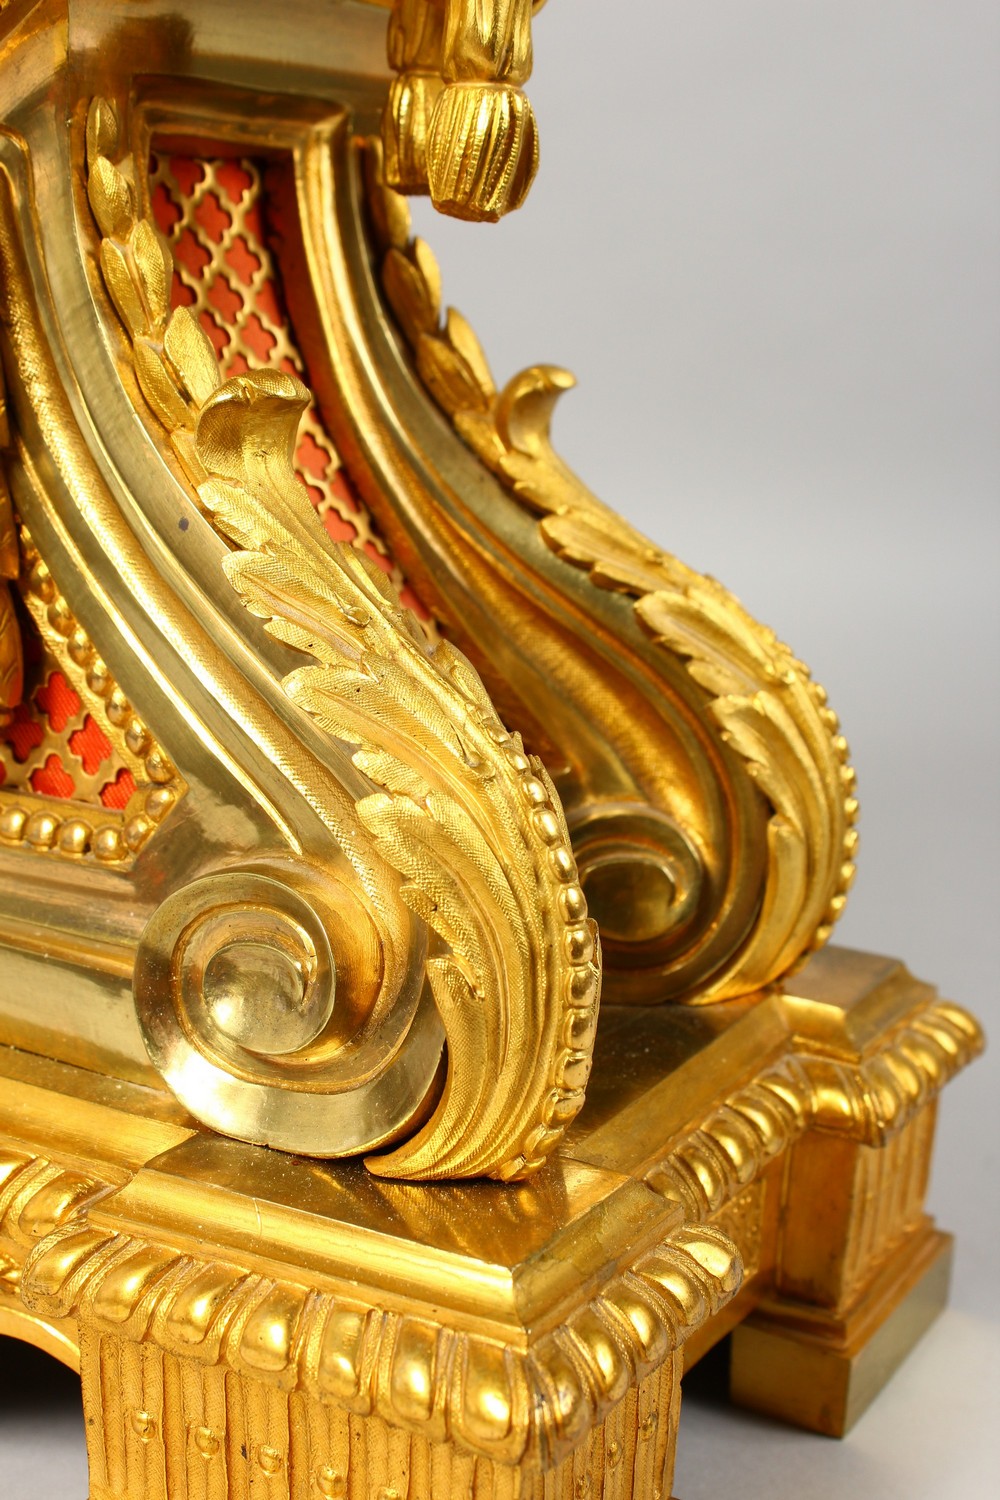 A GOOD 18TH CENTURY FRENCH ORMOLU CLOCK, with blue and white circular dial, eight-day movement - Image 6 of 8